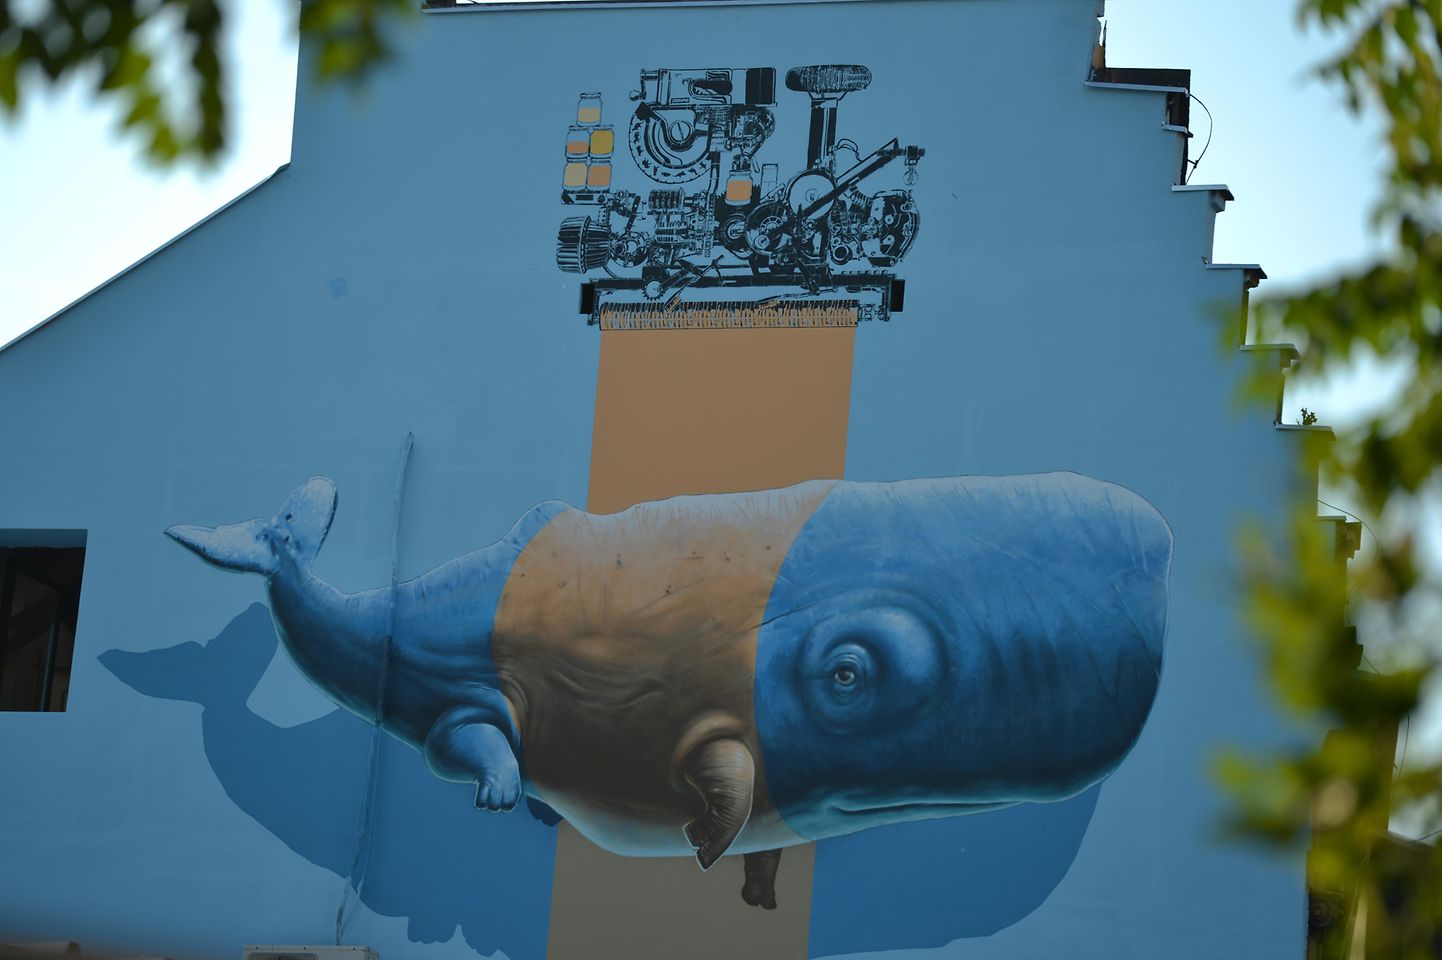 The artistic duo Nevercrew used innovative Ceresit Visage products to craft the mural art